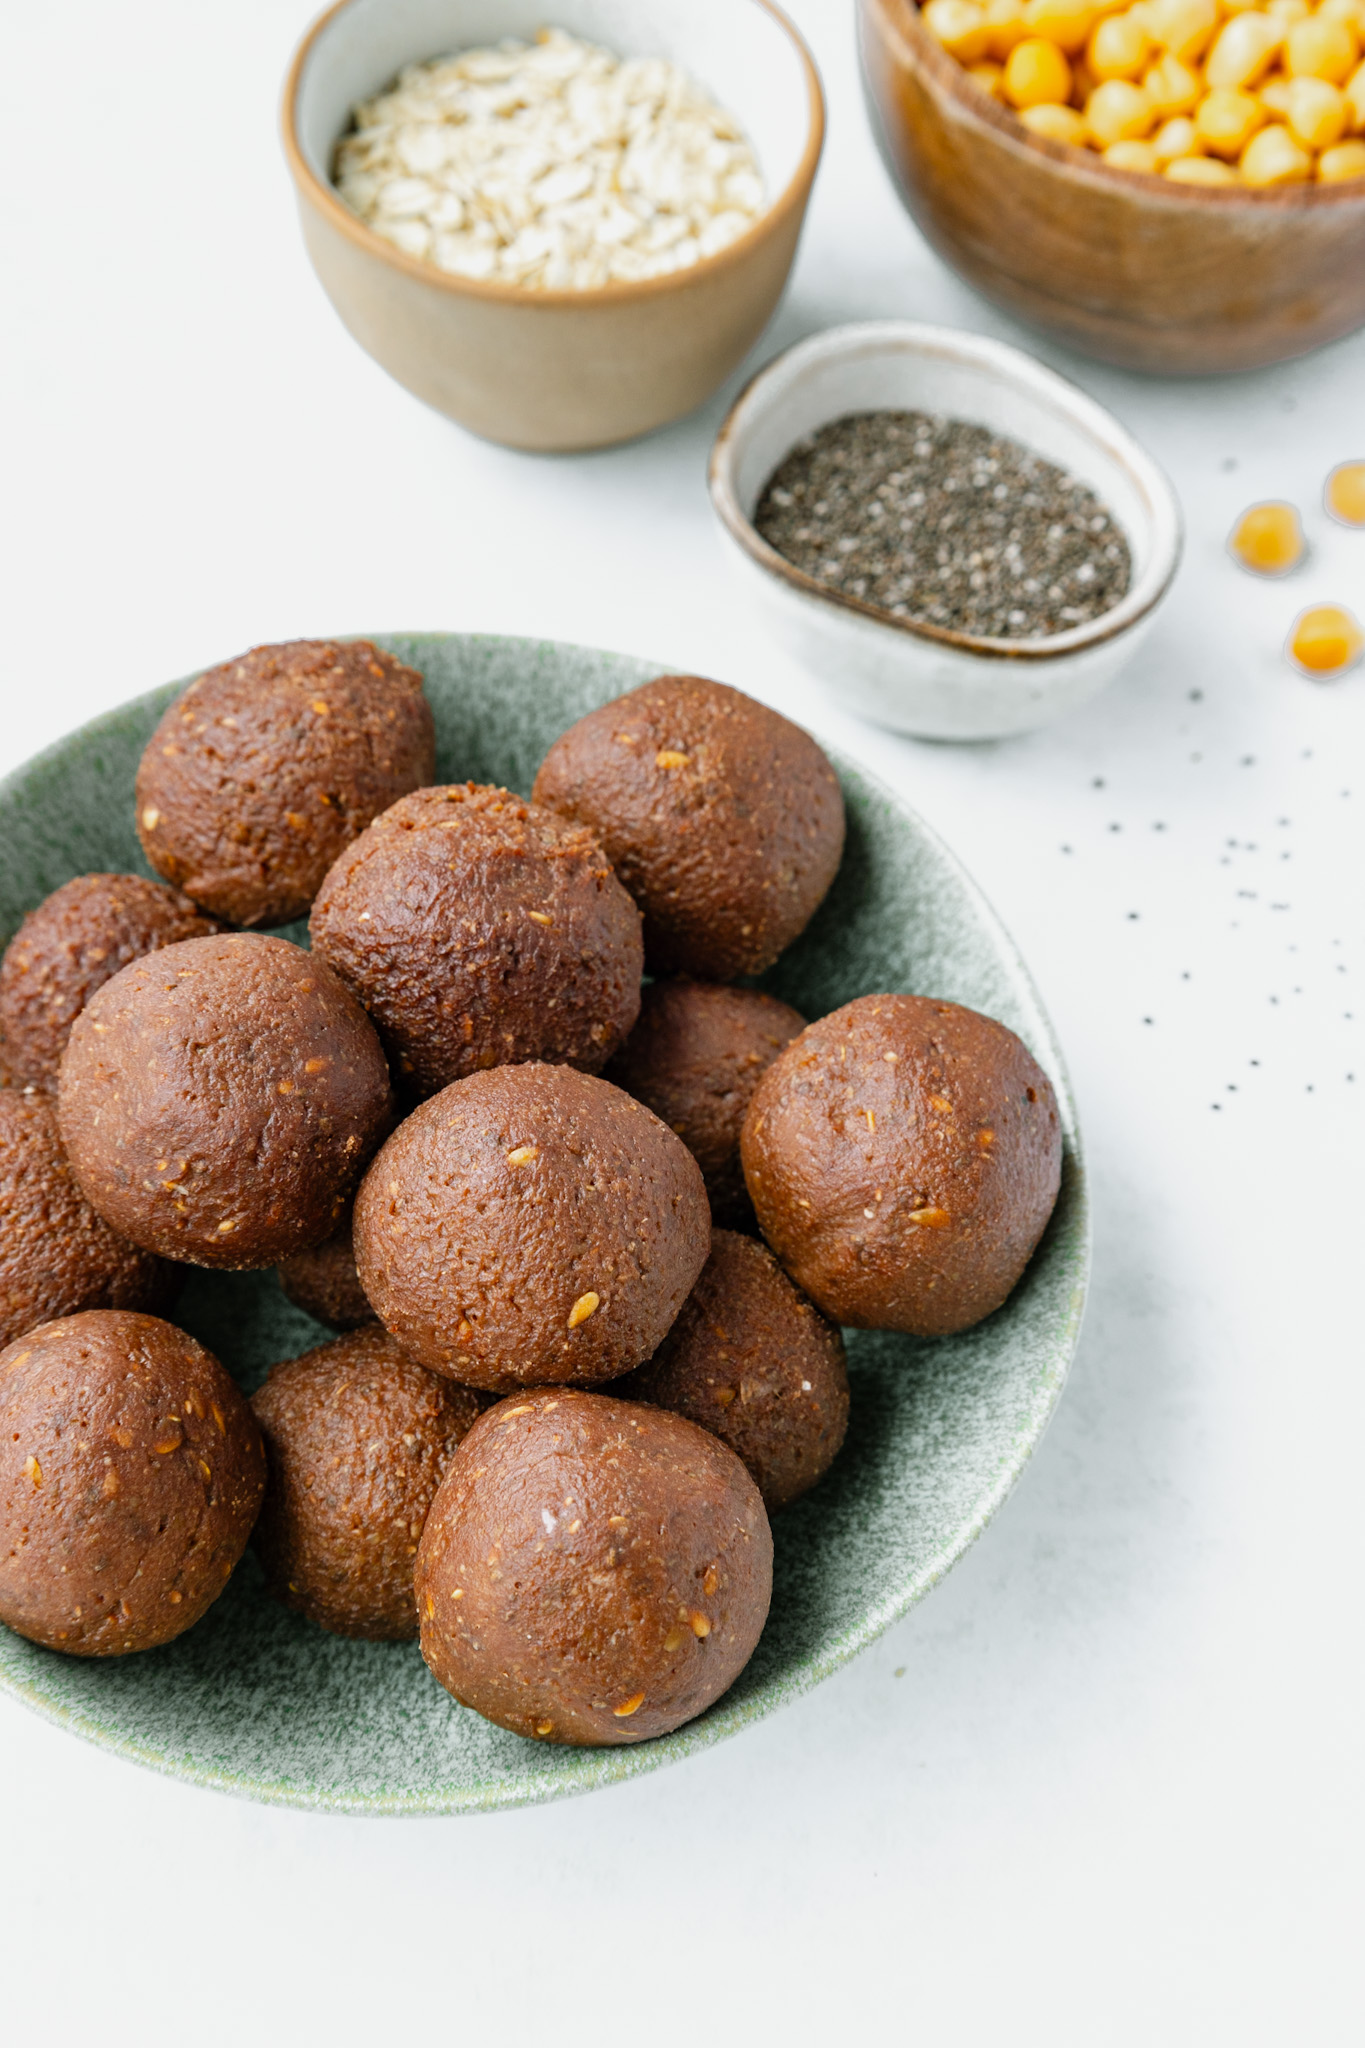 Chickpea Bliss Balls - Chickpea Protein Balls - healthy snacks